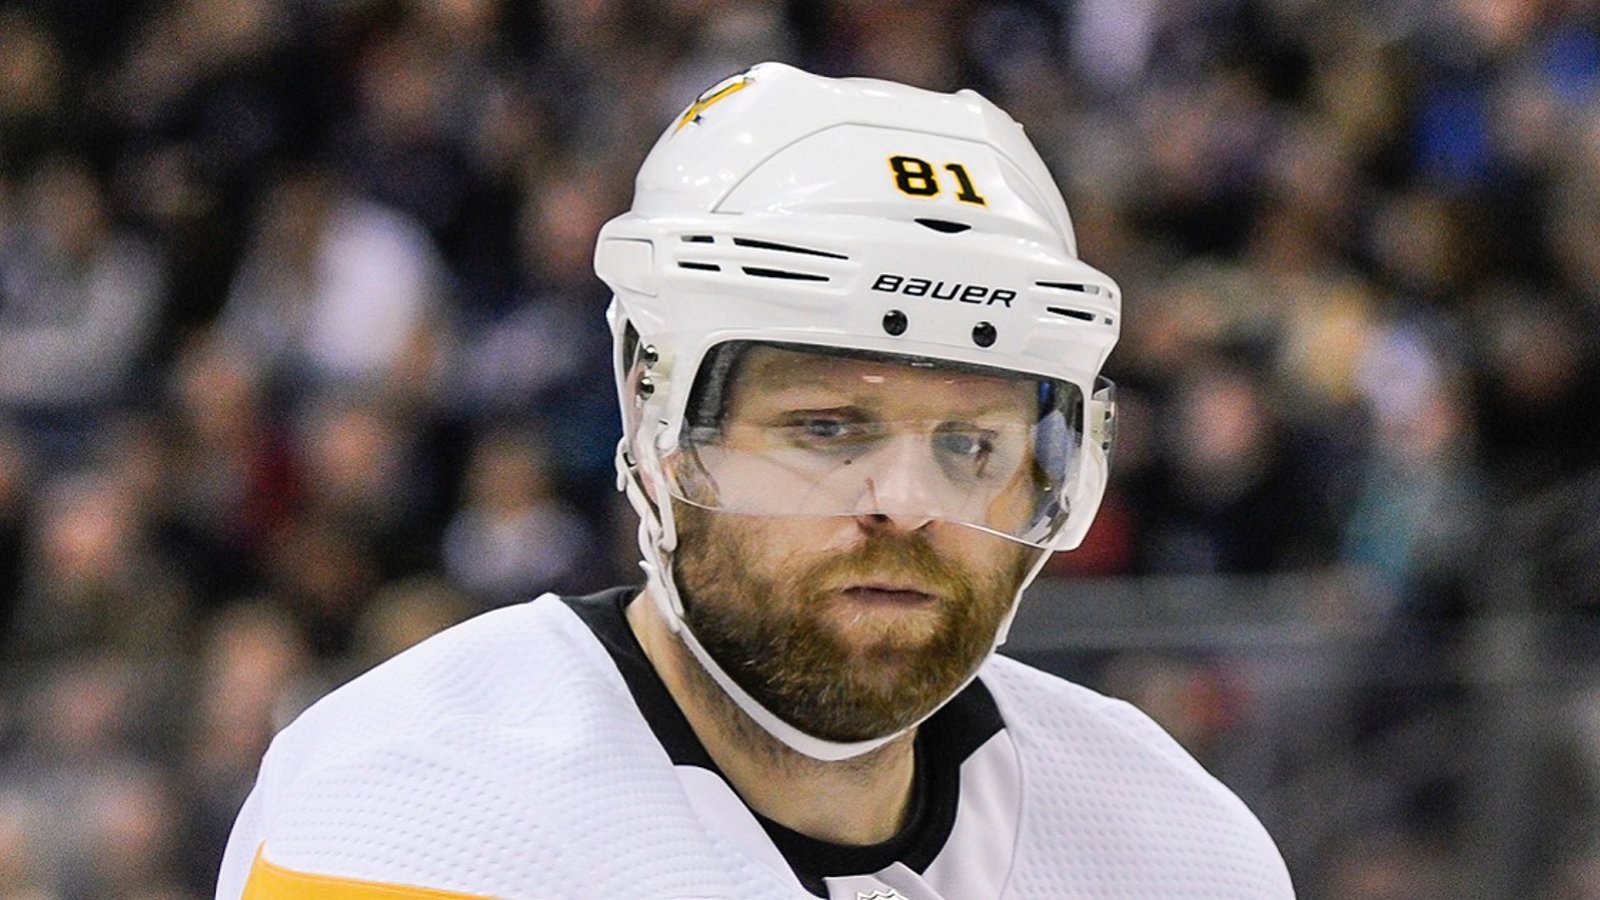 Penguins insider reveals “the truth” about why the Phil Kessel was traded.